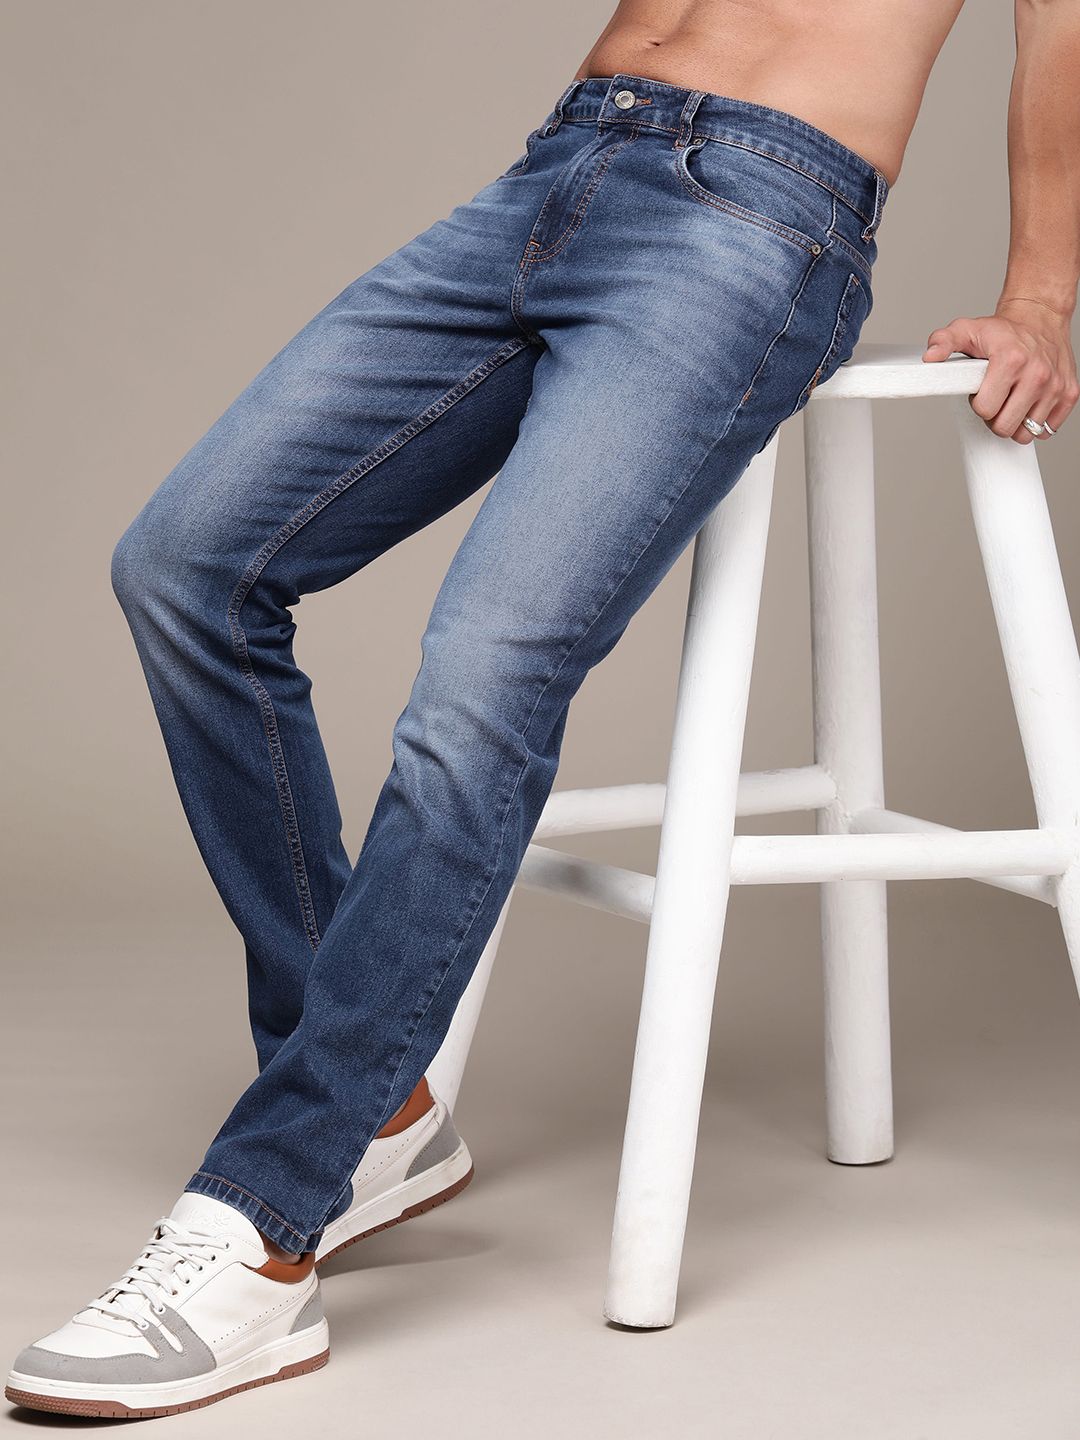 The Roadster Life Co. Men Heavy Fade Stretchable Jeans